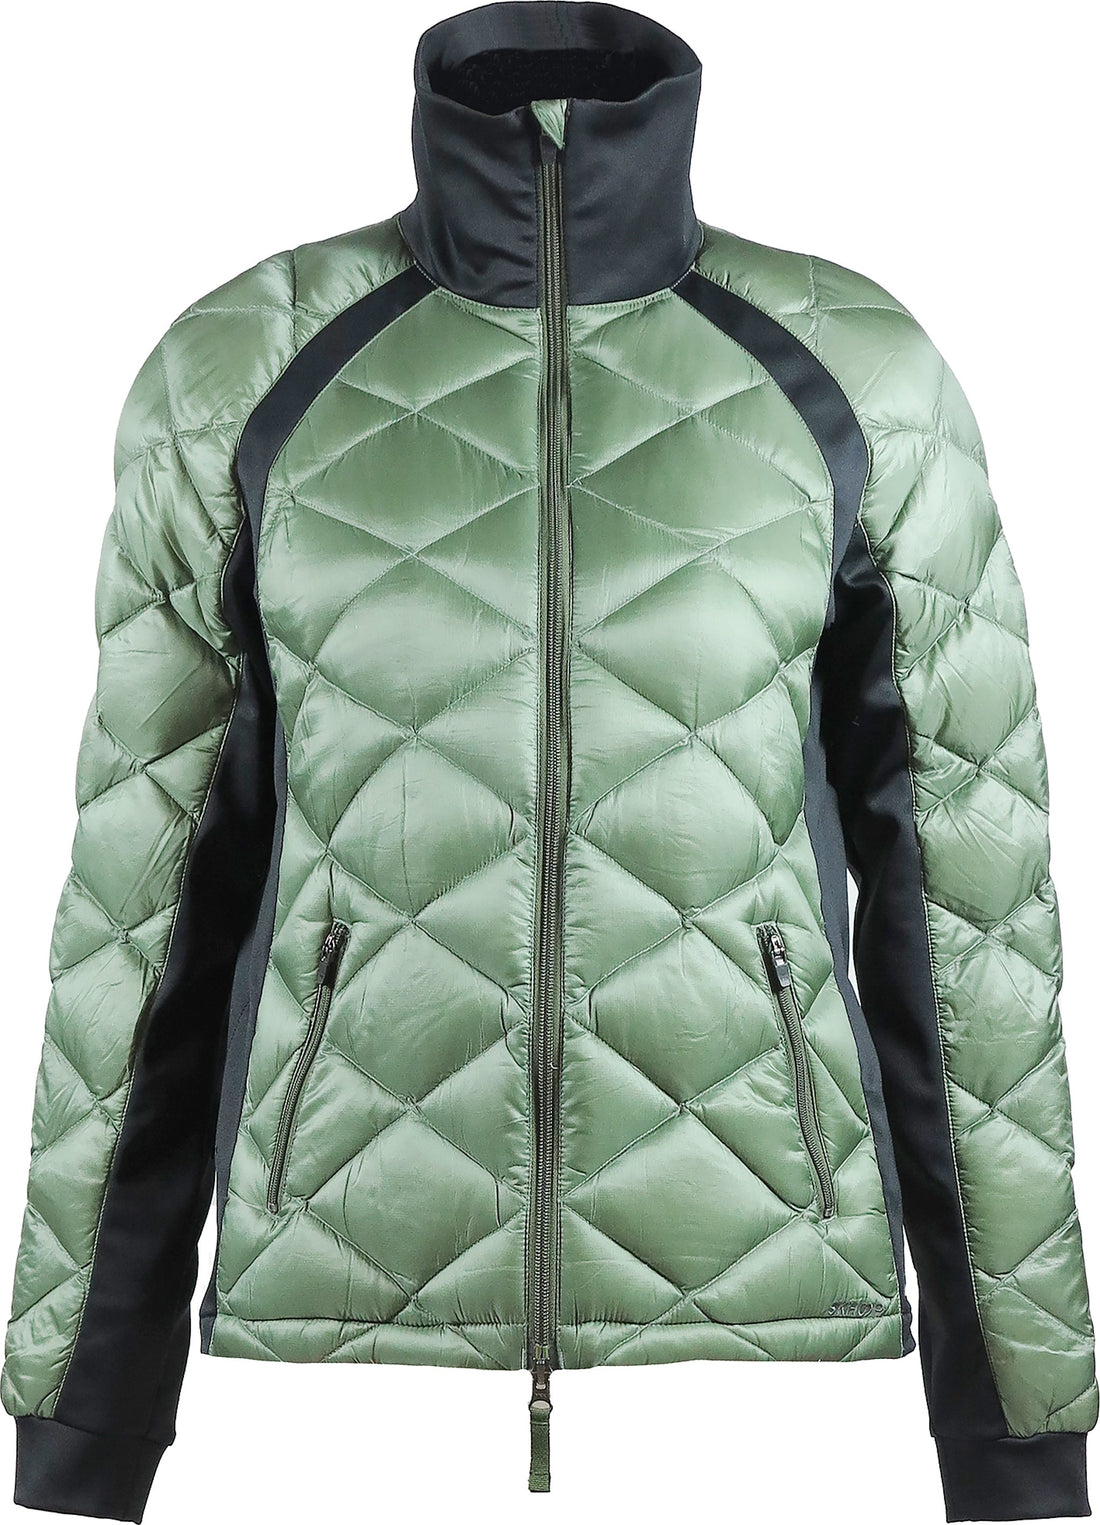 skhoop quilted down puffy coat with side stretch panels in frost green color